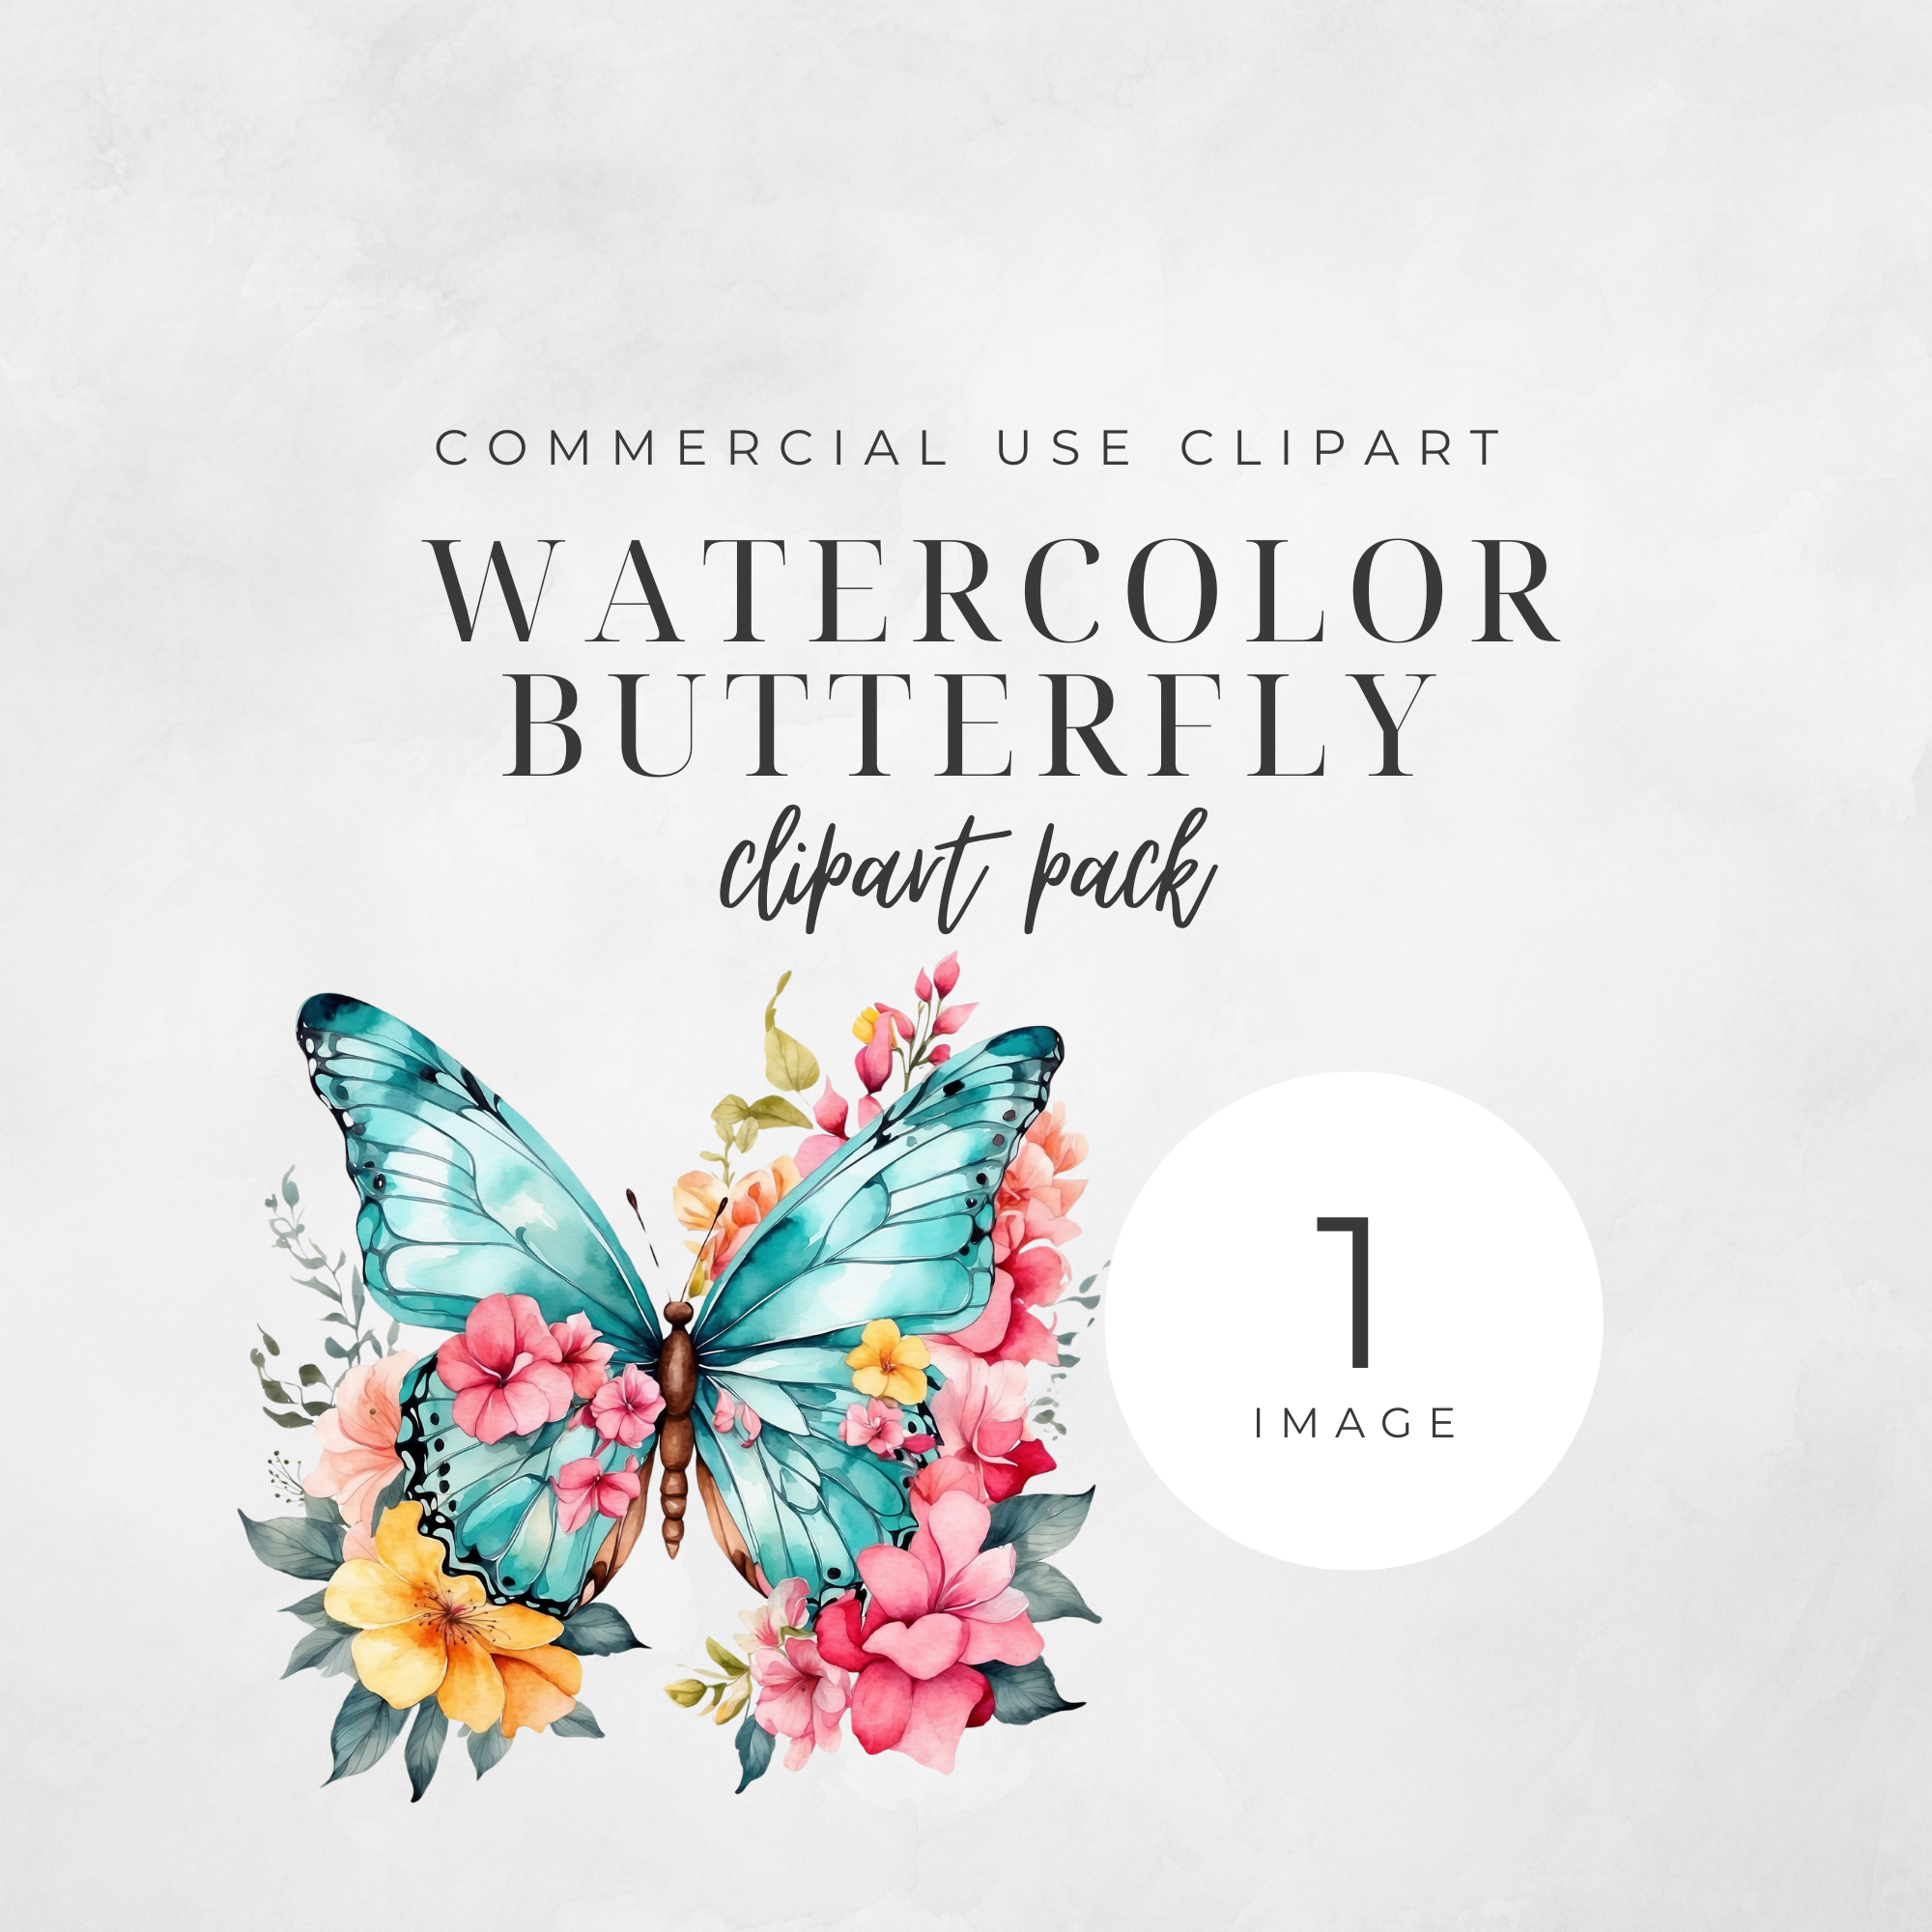 Elegant and Colorful Butterfly Clipart, Rainbow Watercolor Butterflies And Flowers Bundle, transparent png, Butterfly Wings, Commercial use